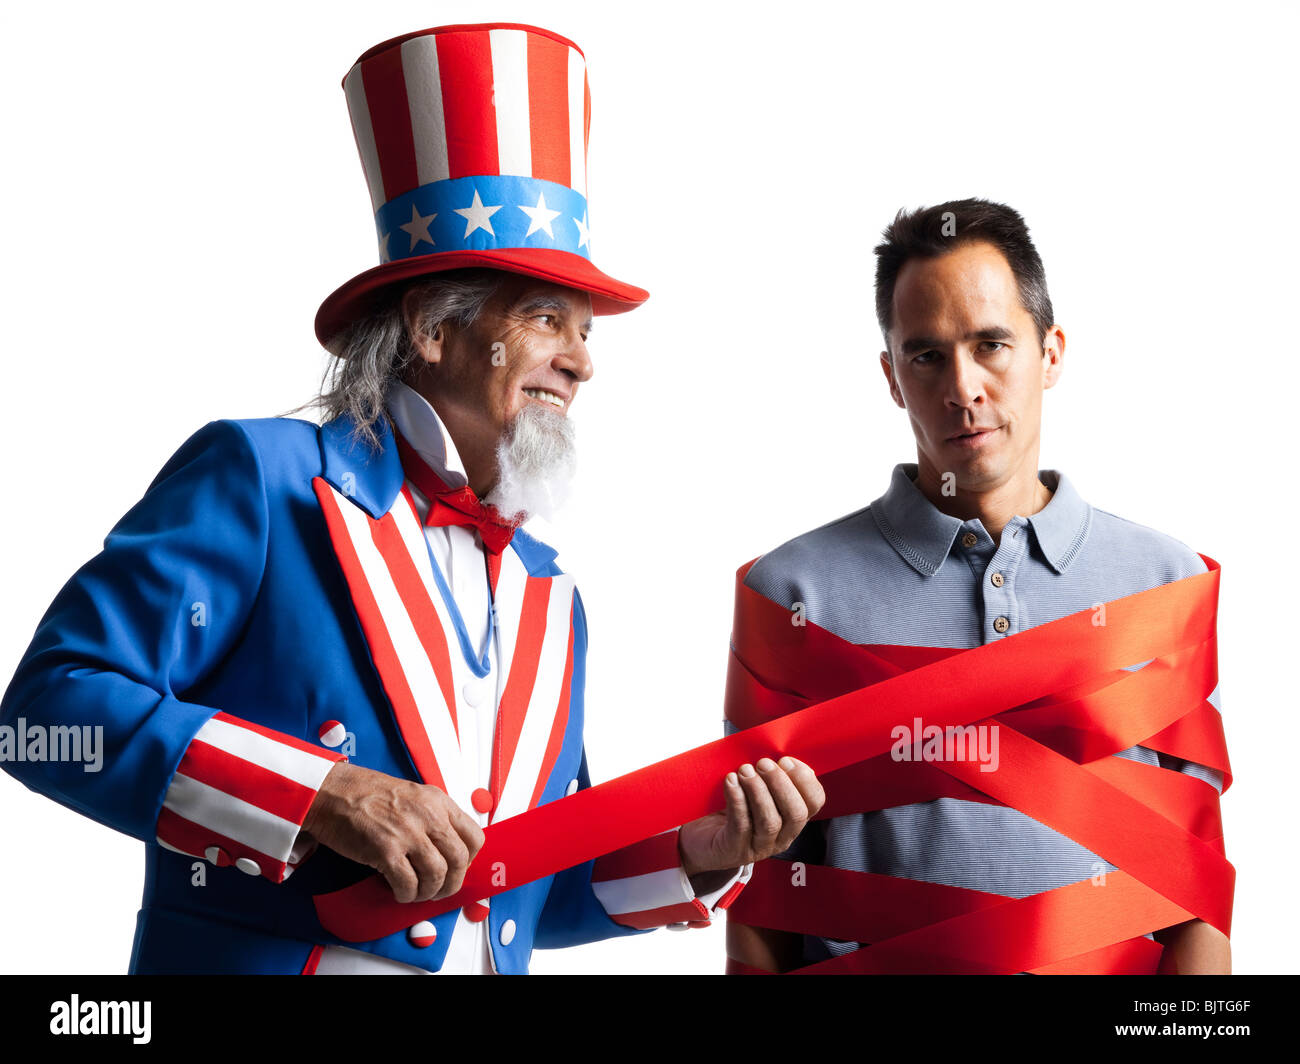 Man in Uncle Sam's costume wrapping other man with ribbon, studio shot Stock Photo